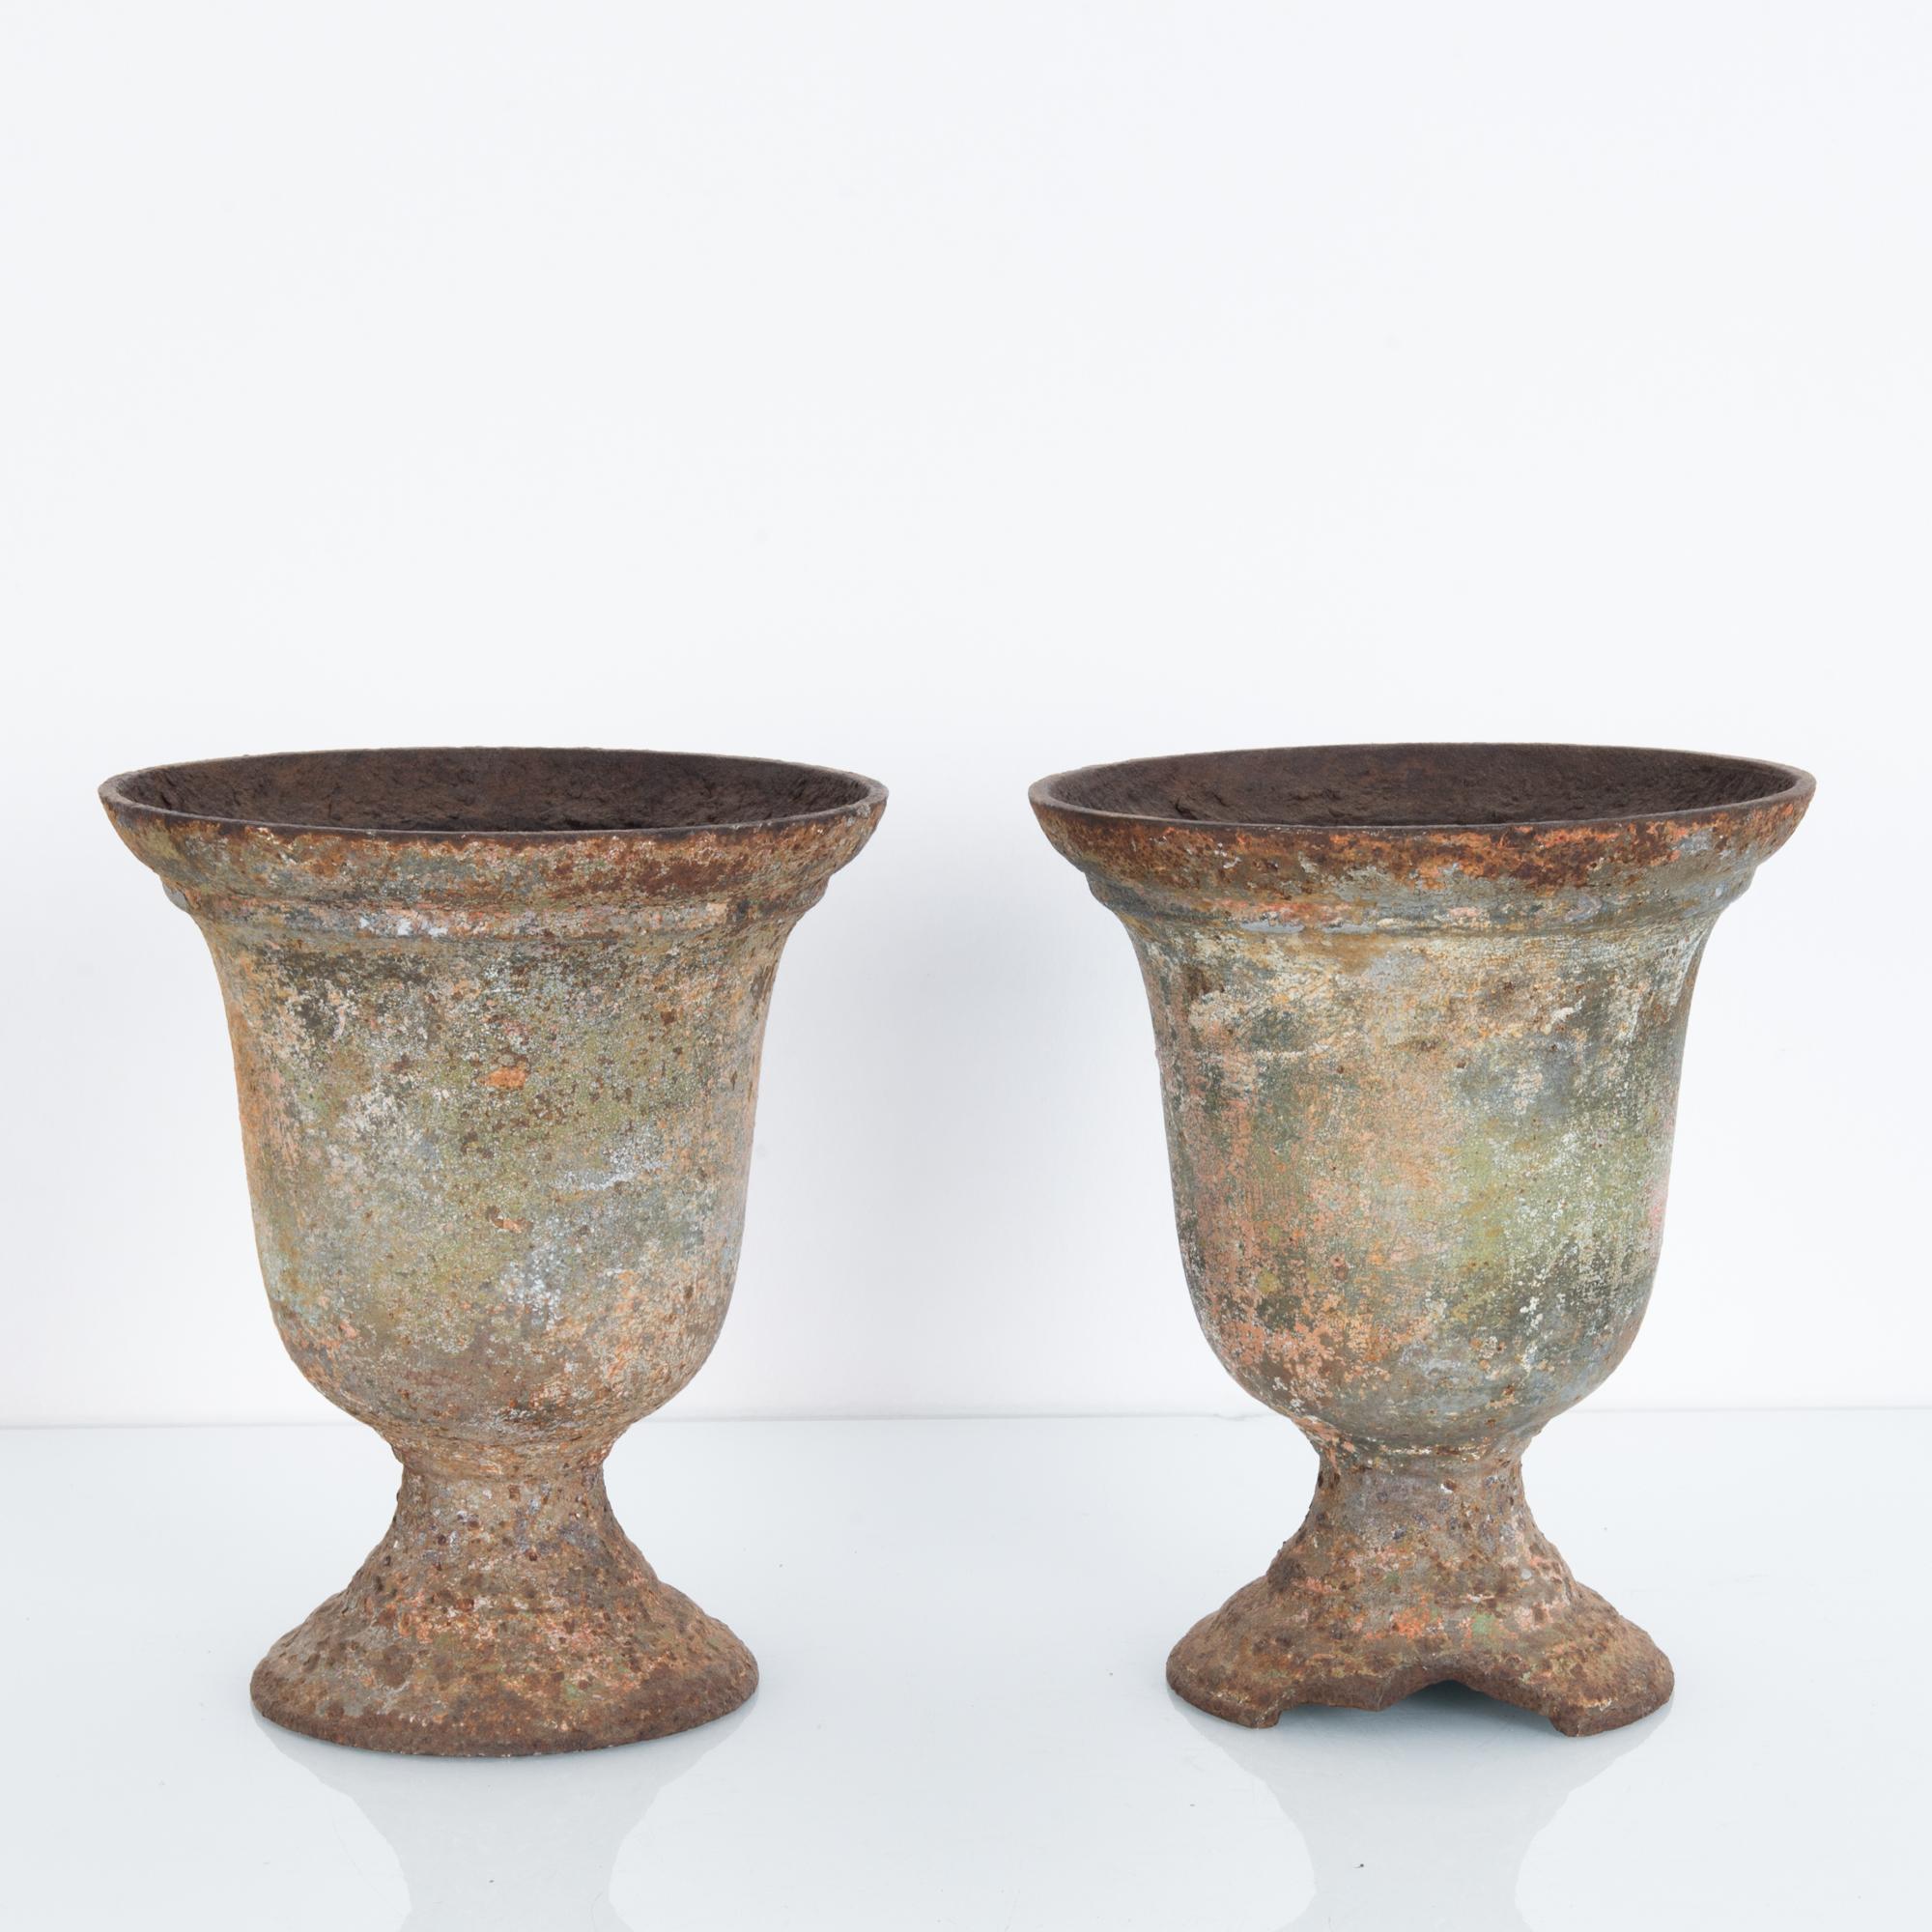 A pair of cast iron planters from France, circa 1900. A simple campana shape with an aged patina. Oxidation gives a color palette of rust tones, terracotta and verdigris. The weathering of the cast iron — including a missing portion of the base of